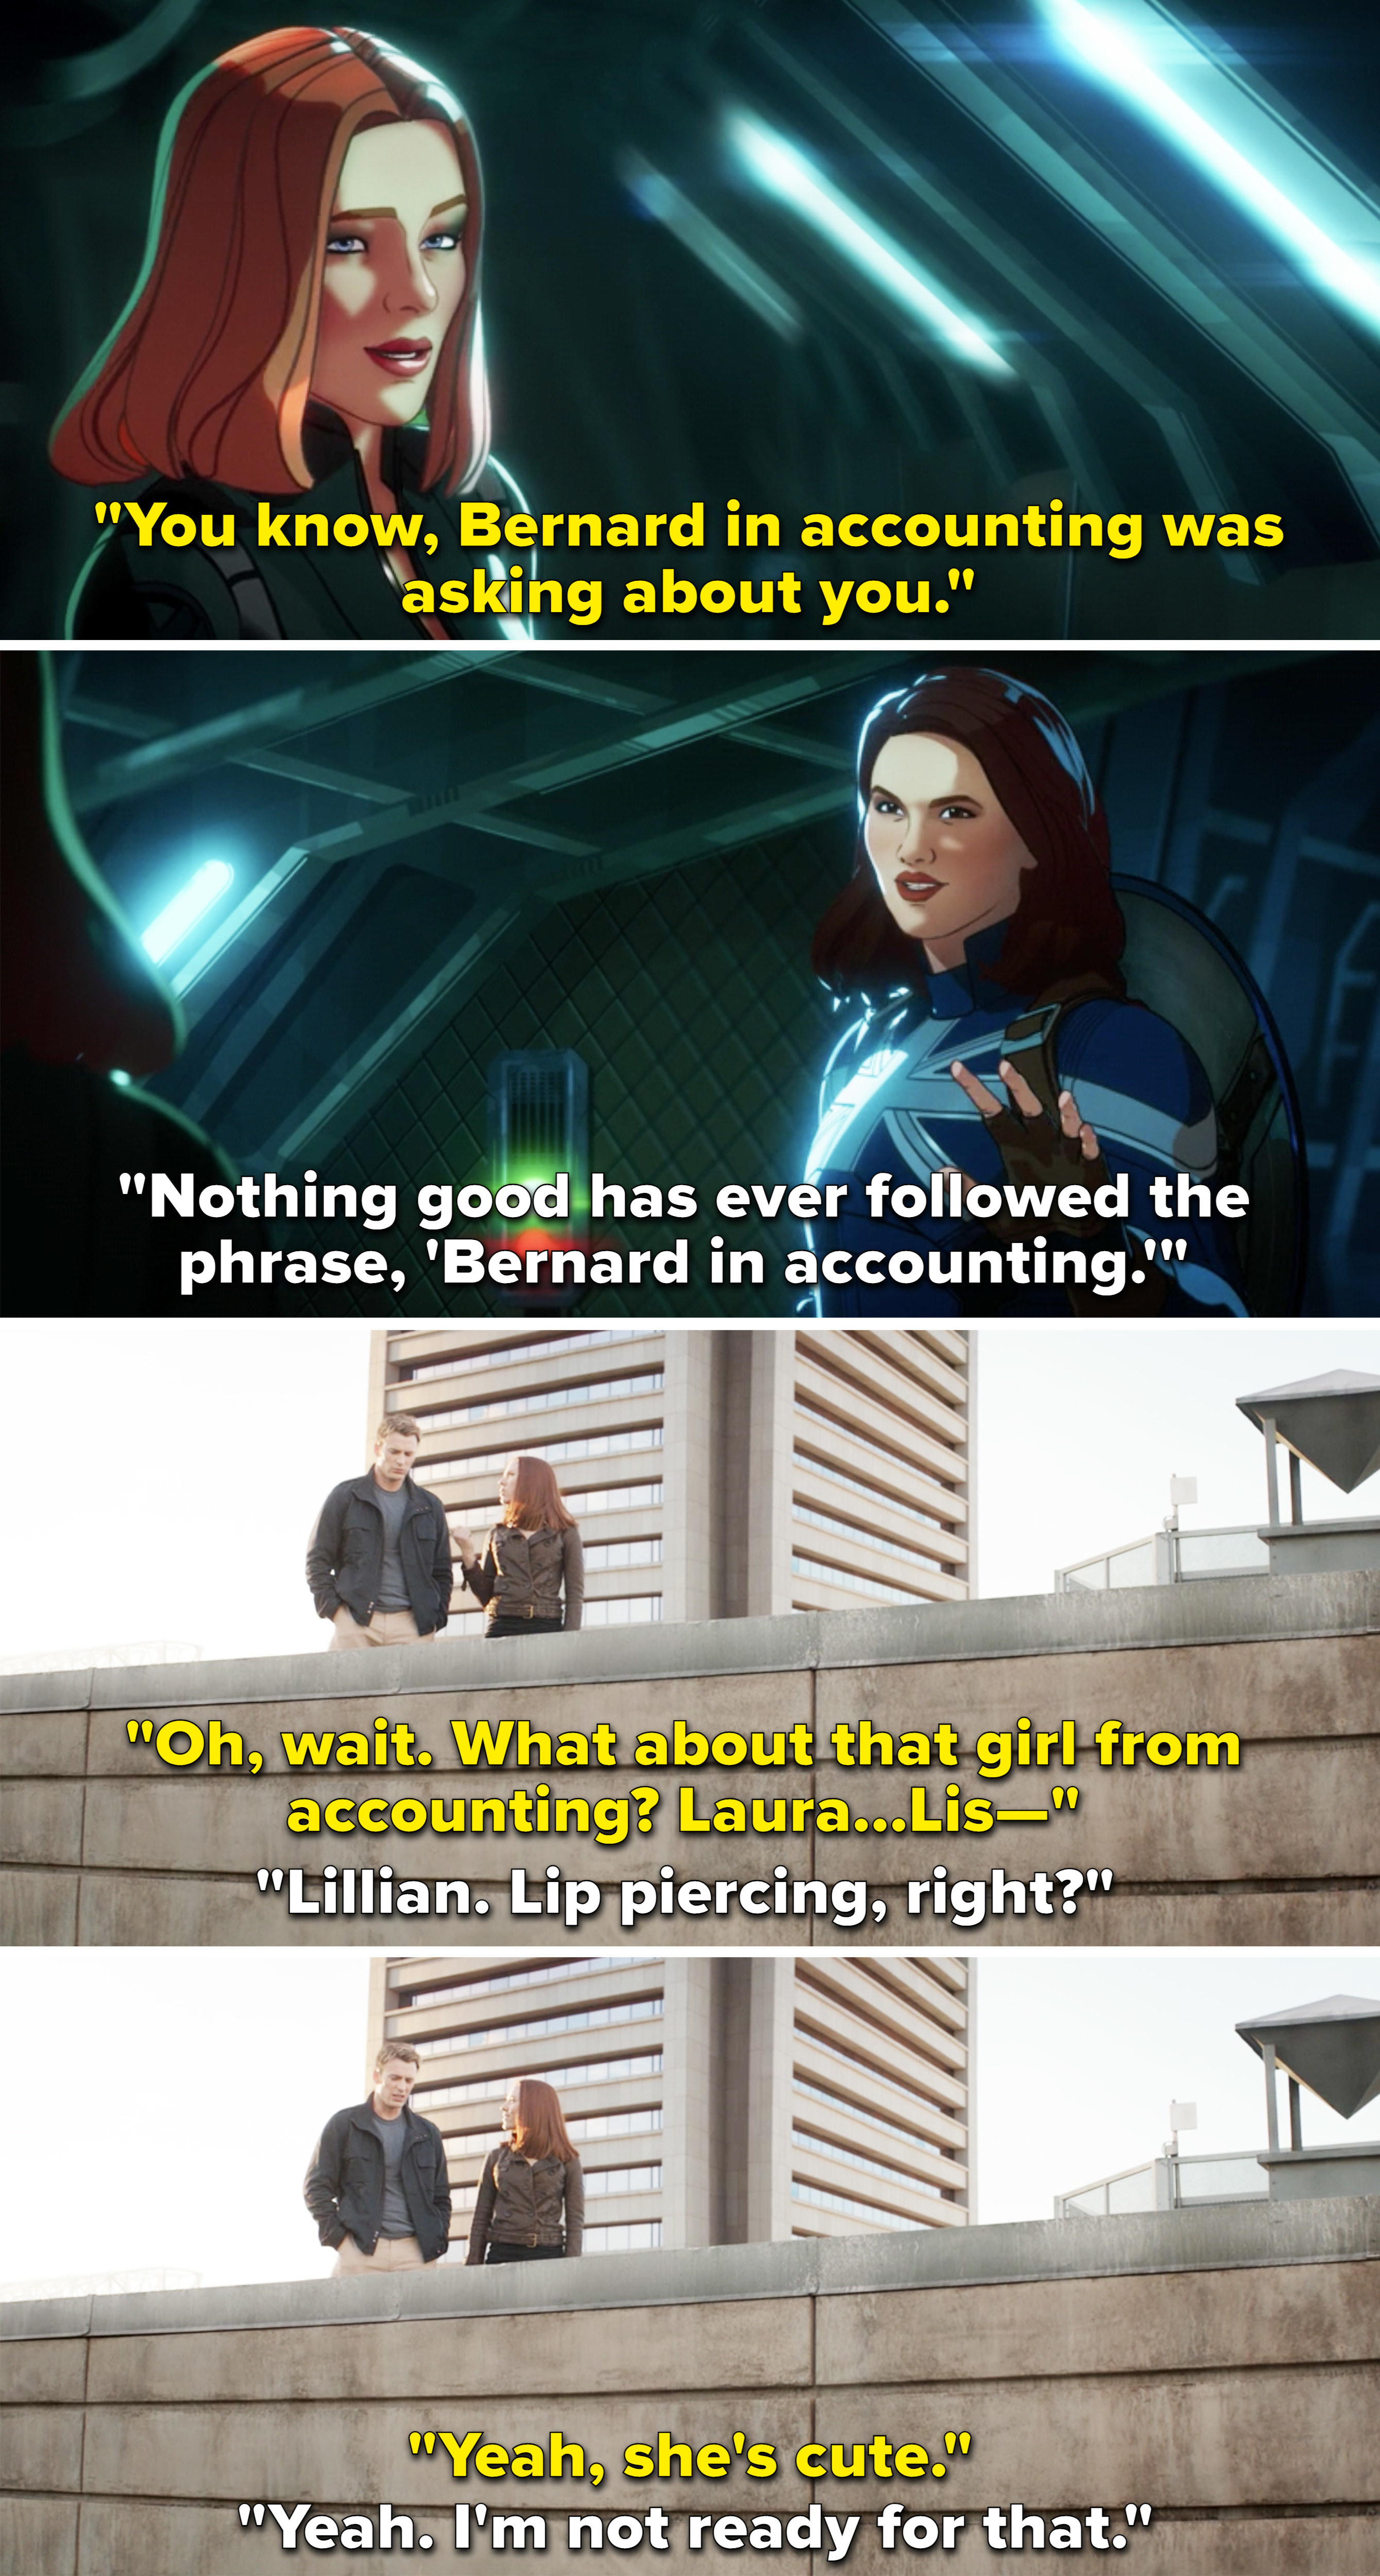 Natasha and Peggy talking about Bernard from accounting vs Natasha and Steve talking about Lillian